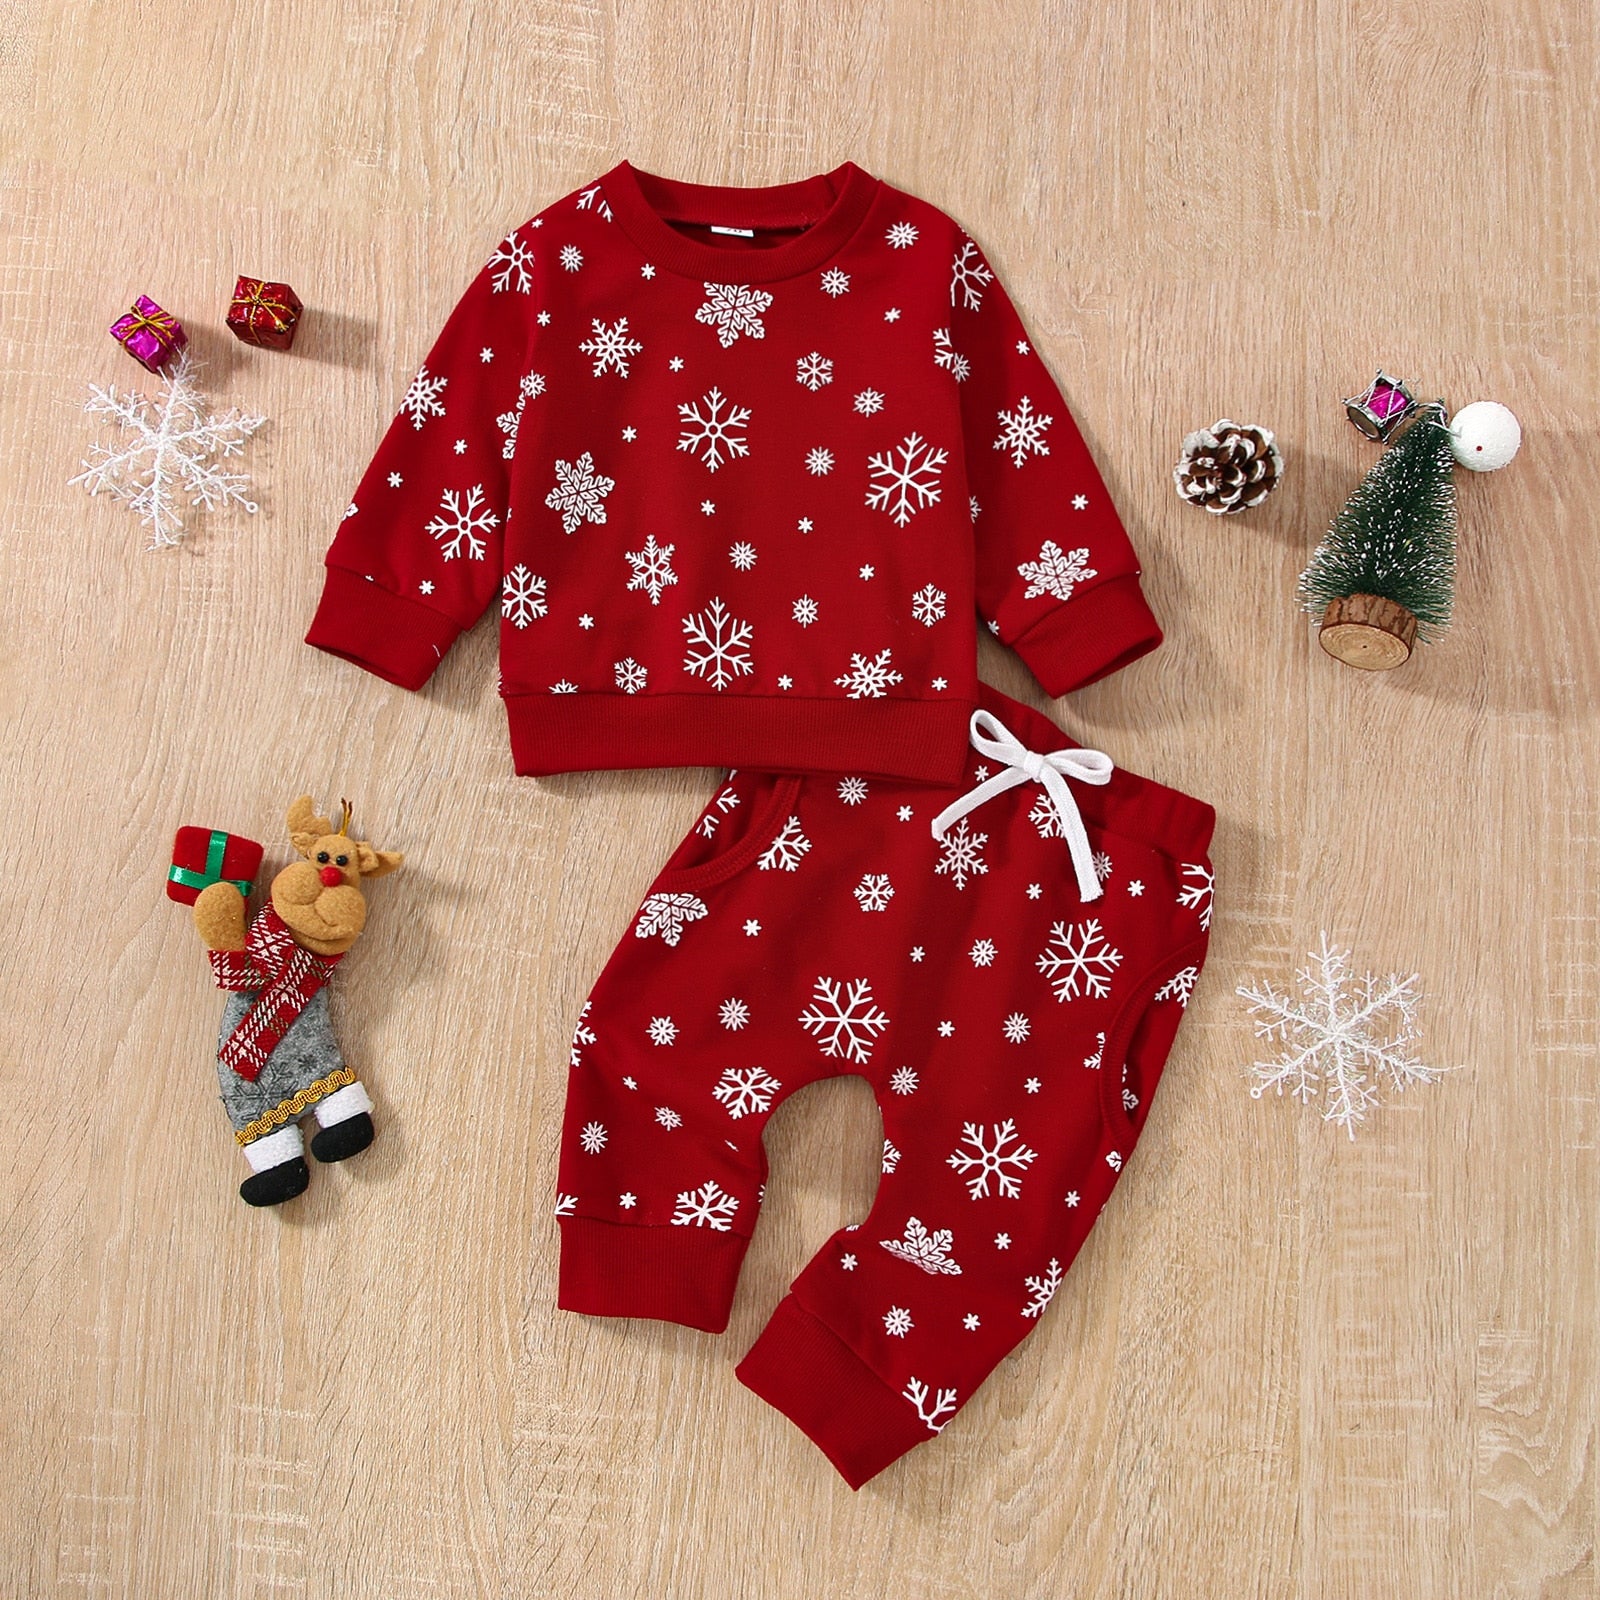 Christmas Snowflakes Outfit